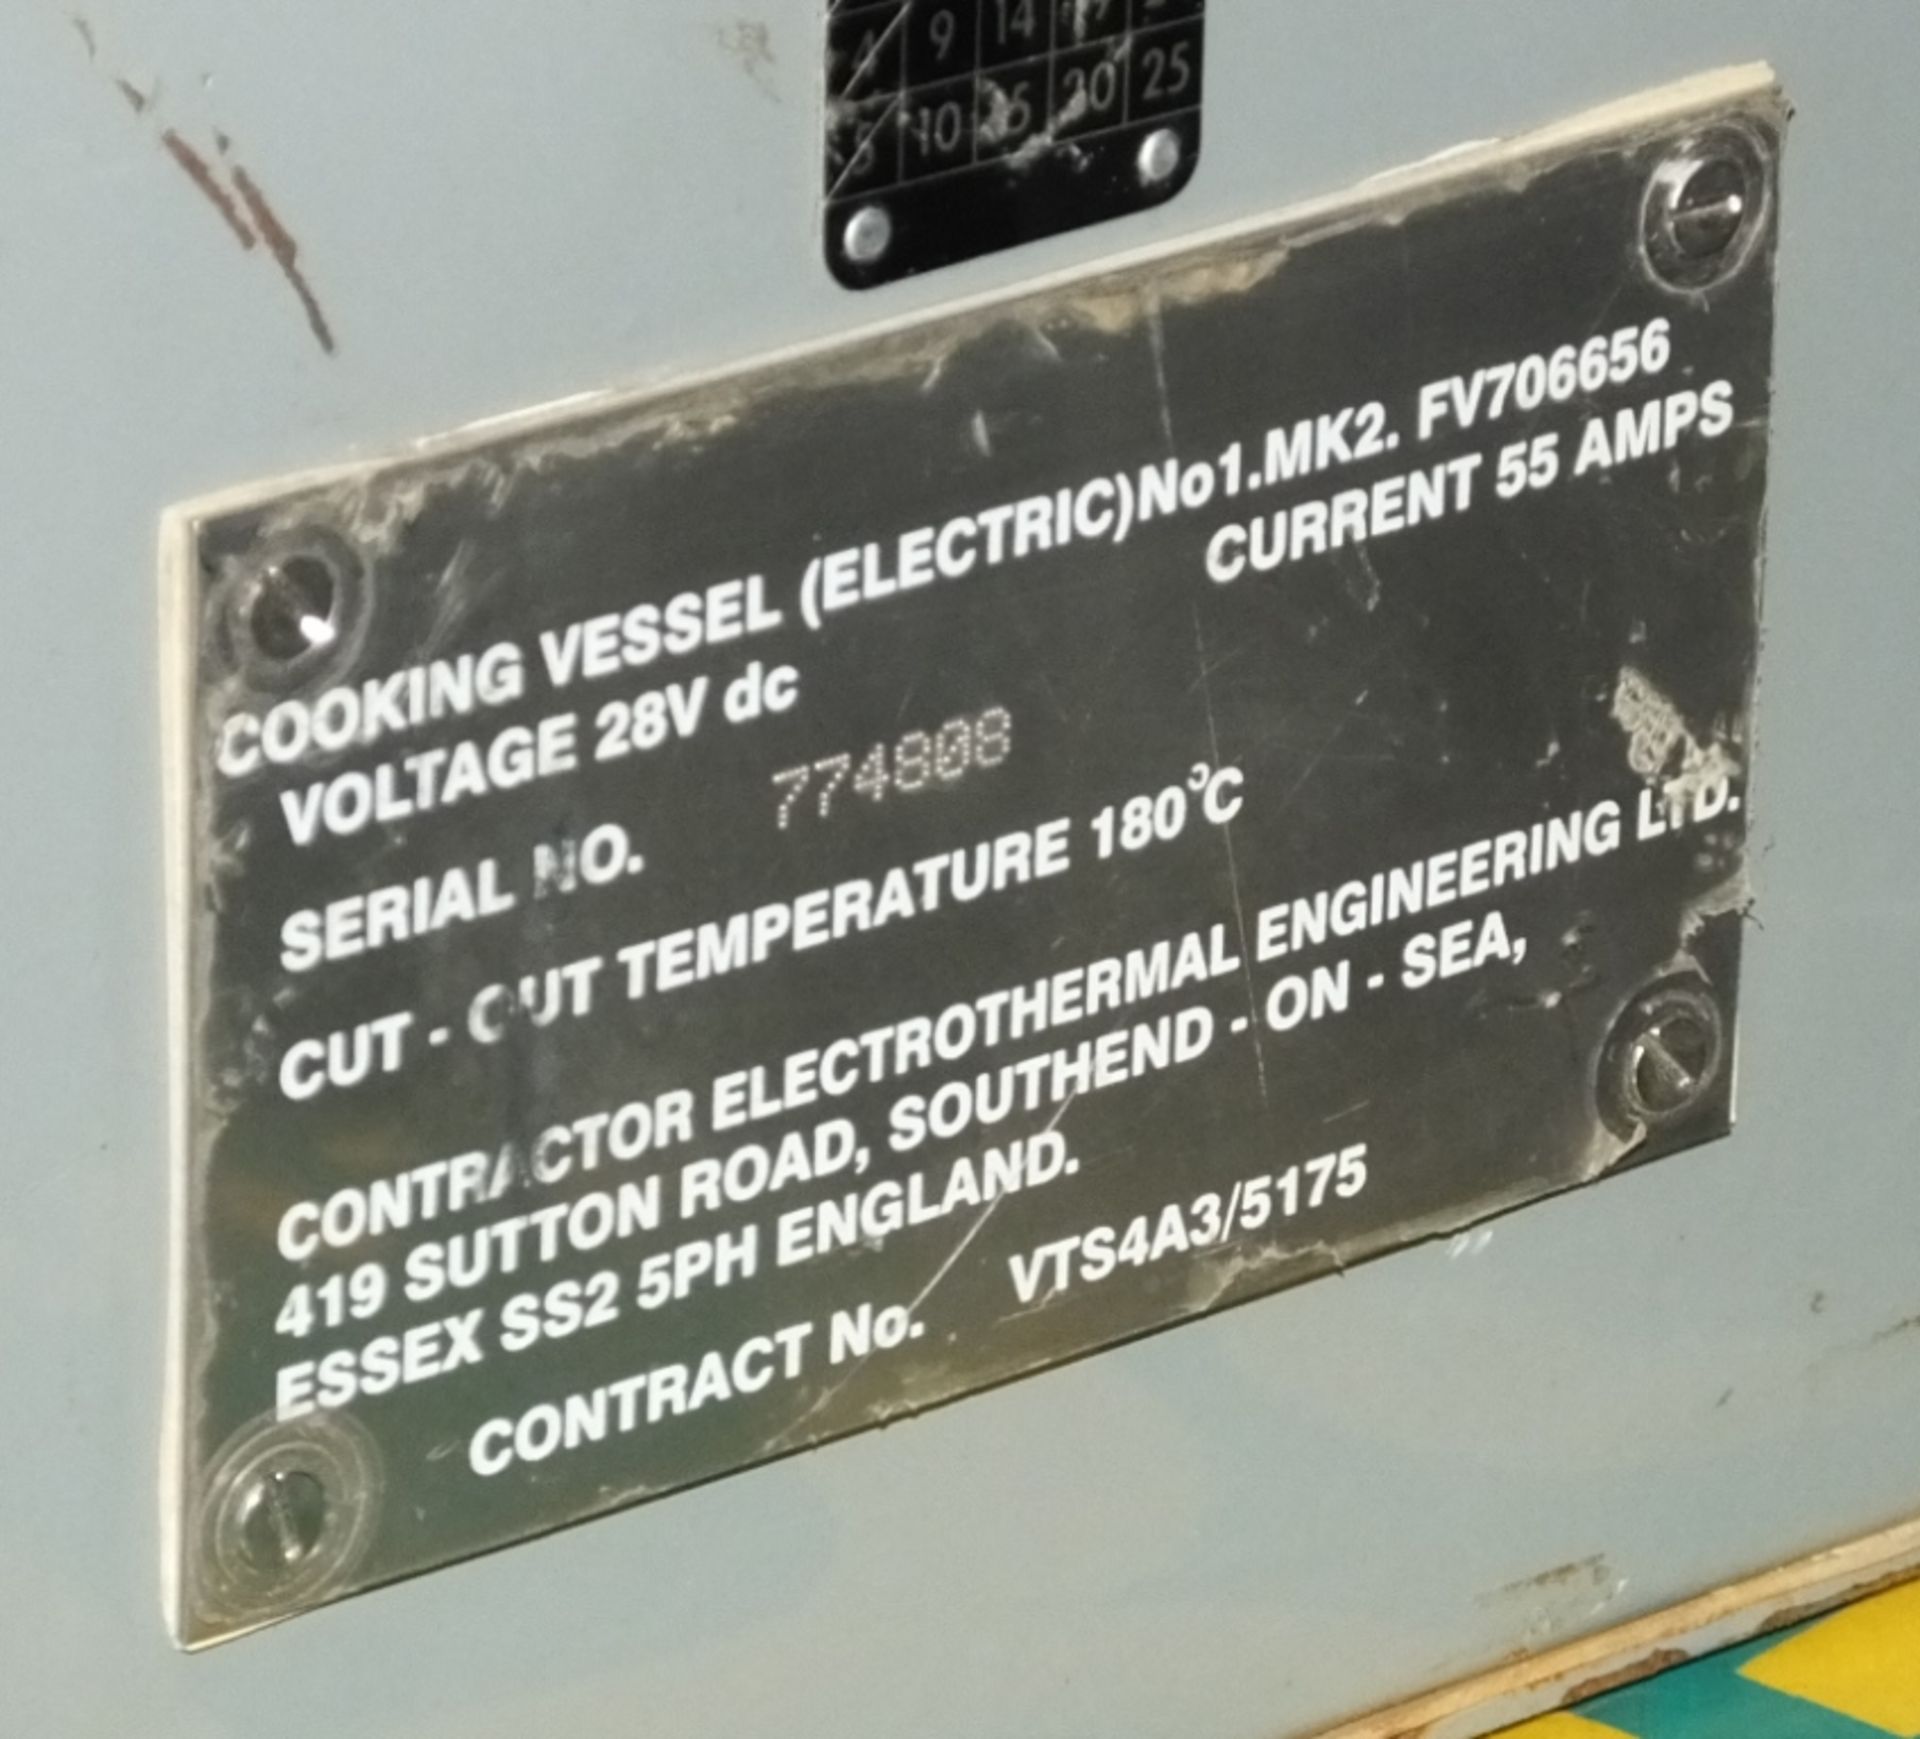 Cooking / Boiling Vessel 28V DC MK2 FV70656 with cable - Image 2 of 2